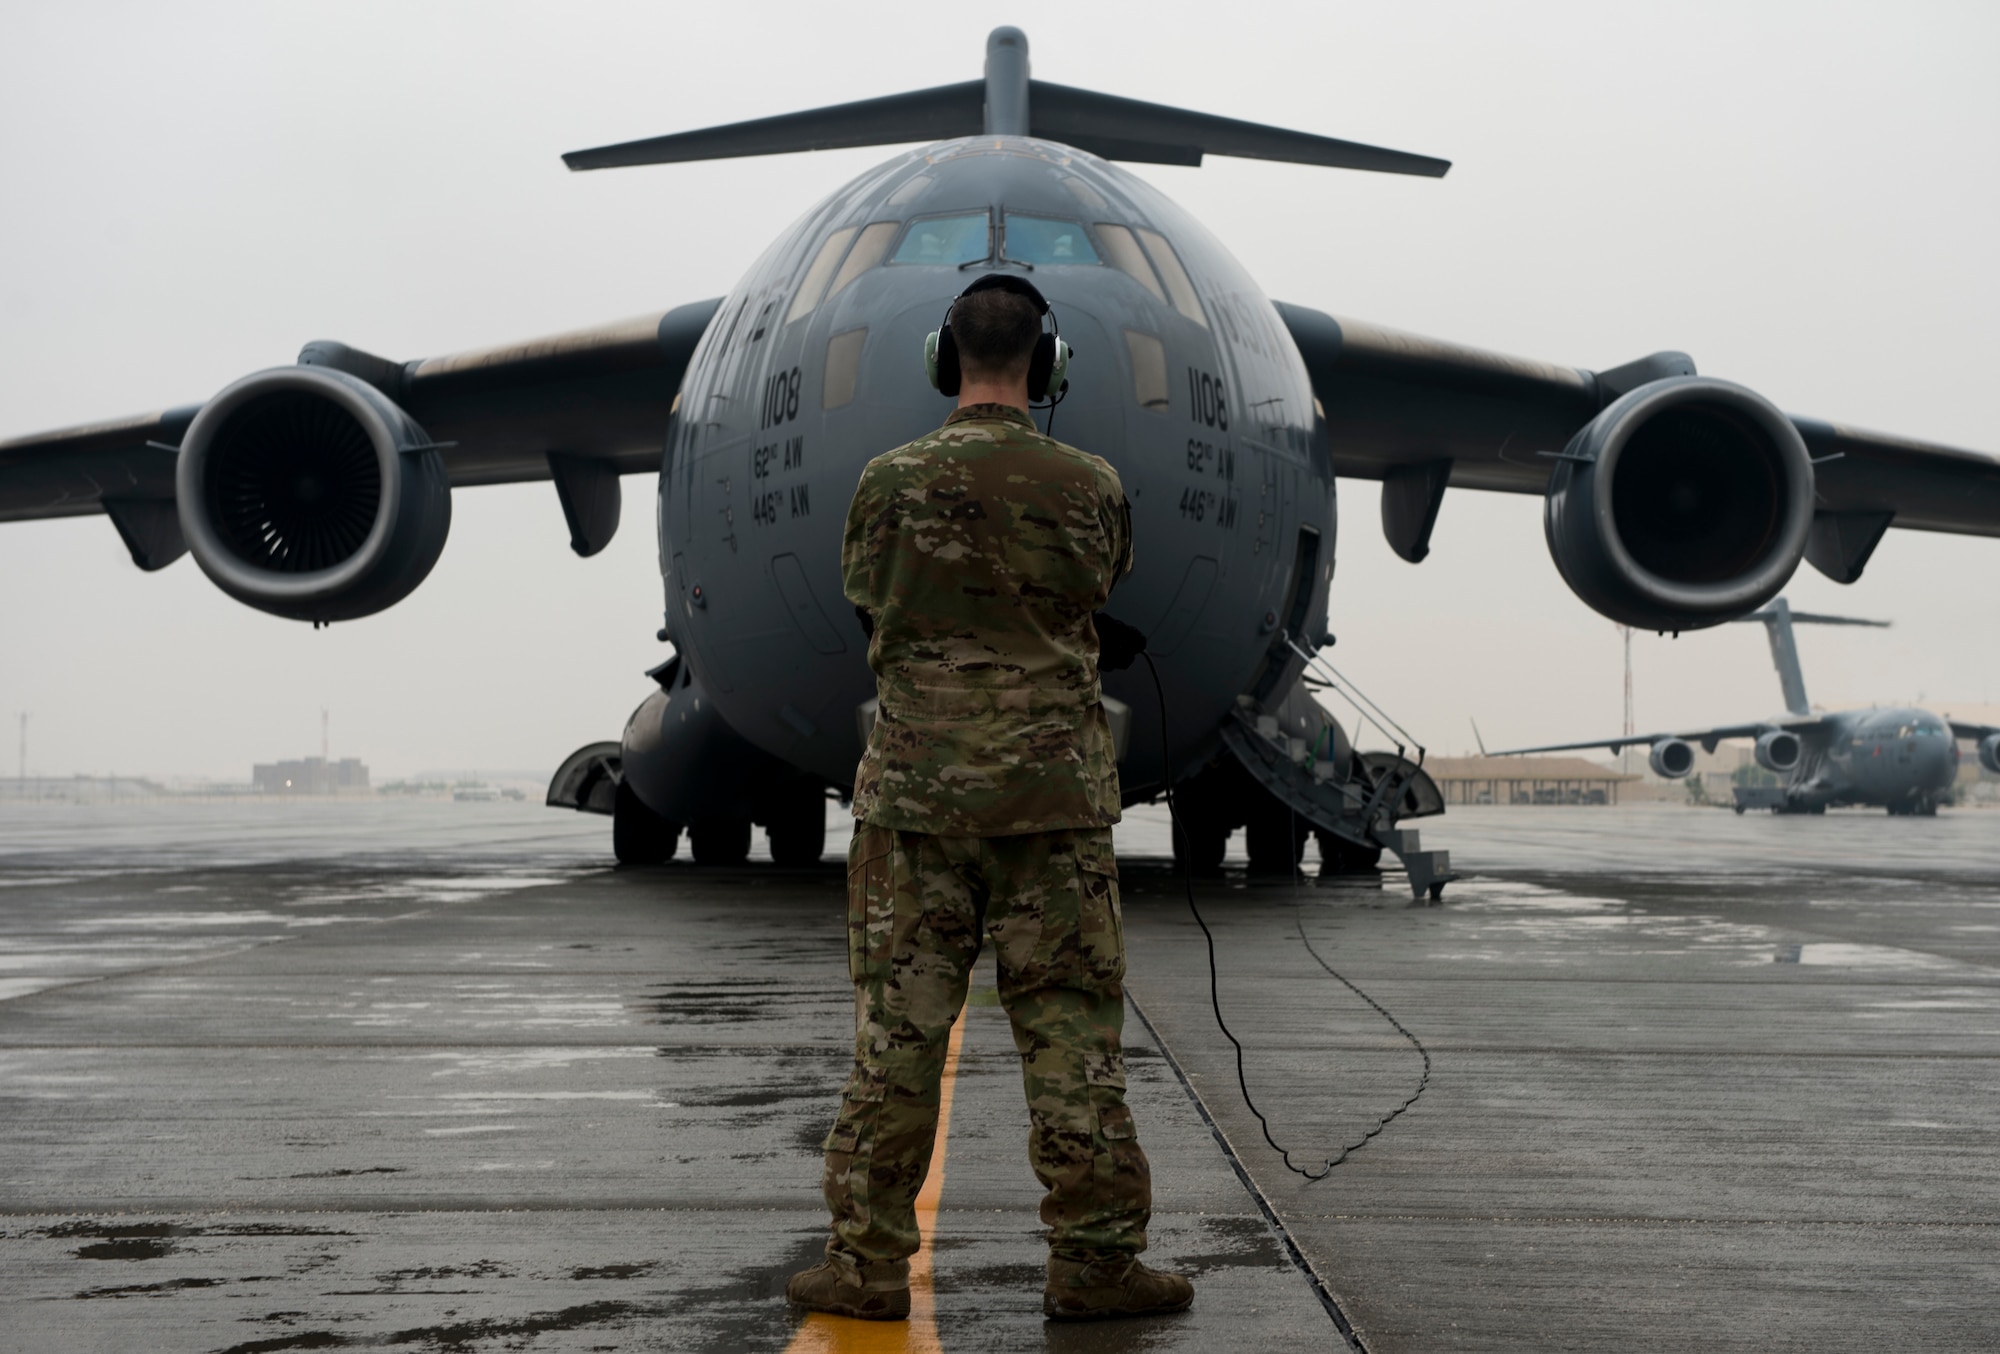 A U.S. Air Force C-17 Globemaster III loadmaster assigned to the 816th Expeditionary Airlift Squadron performs engine start checks at Al Udeid Air Base, Qatar, Jan. 10, 2020.